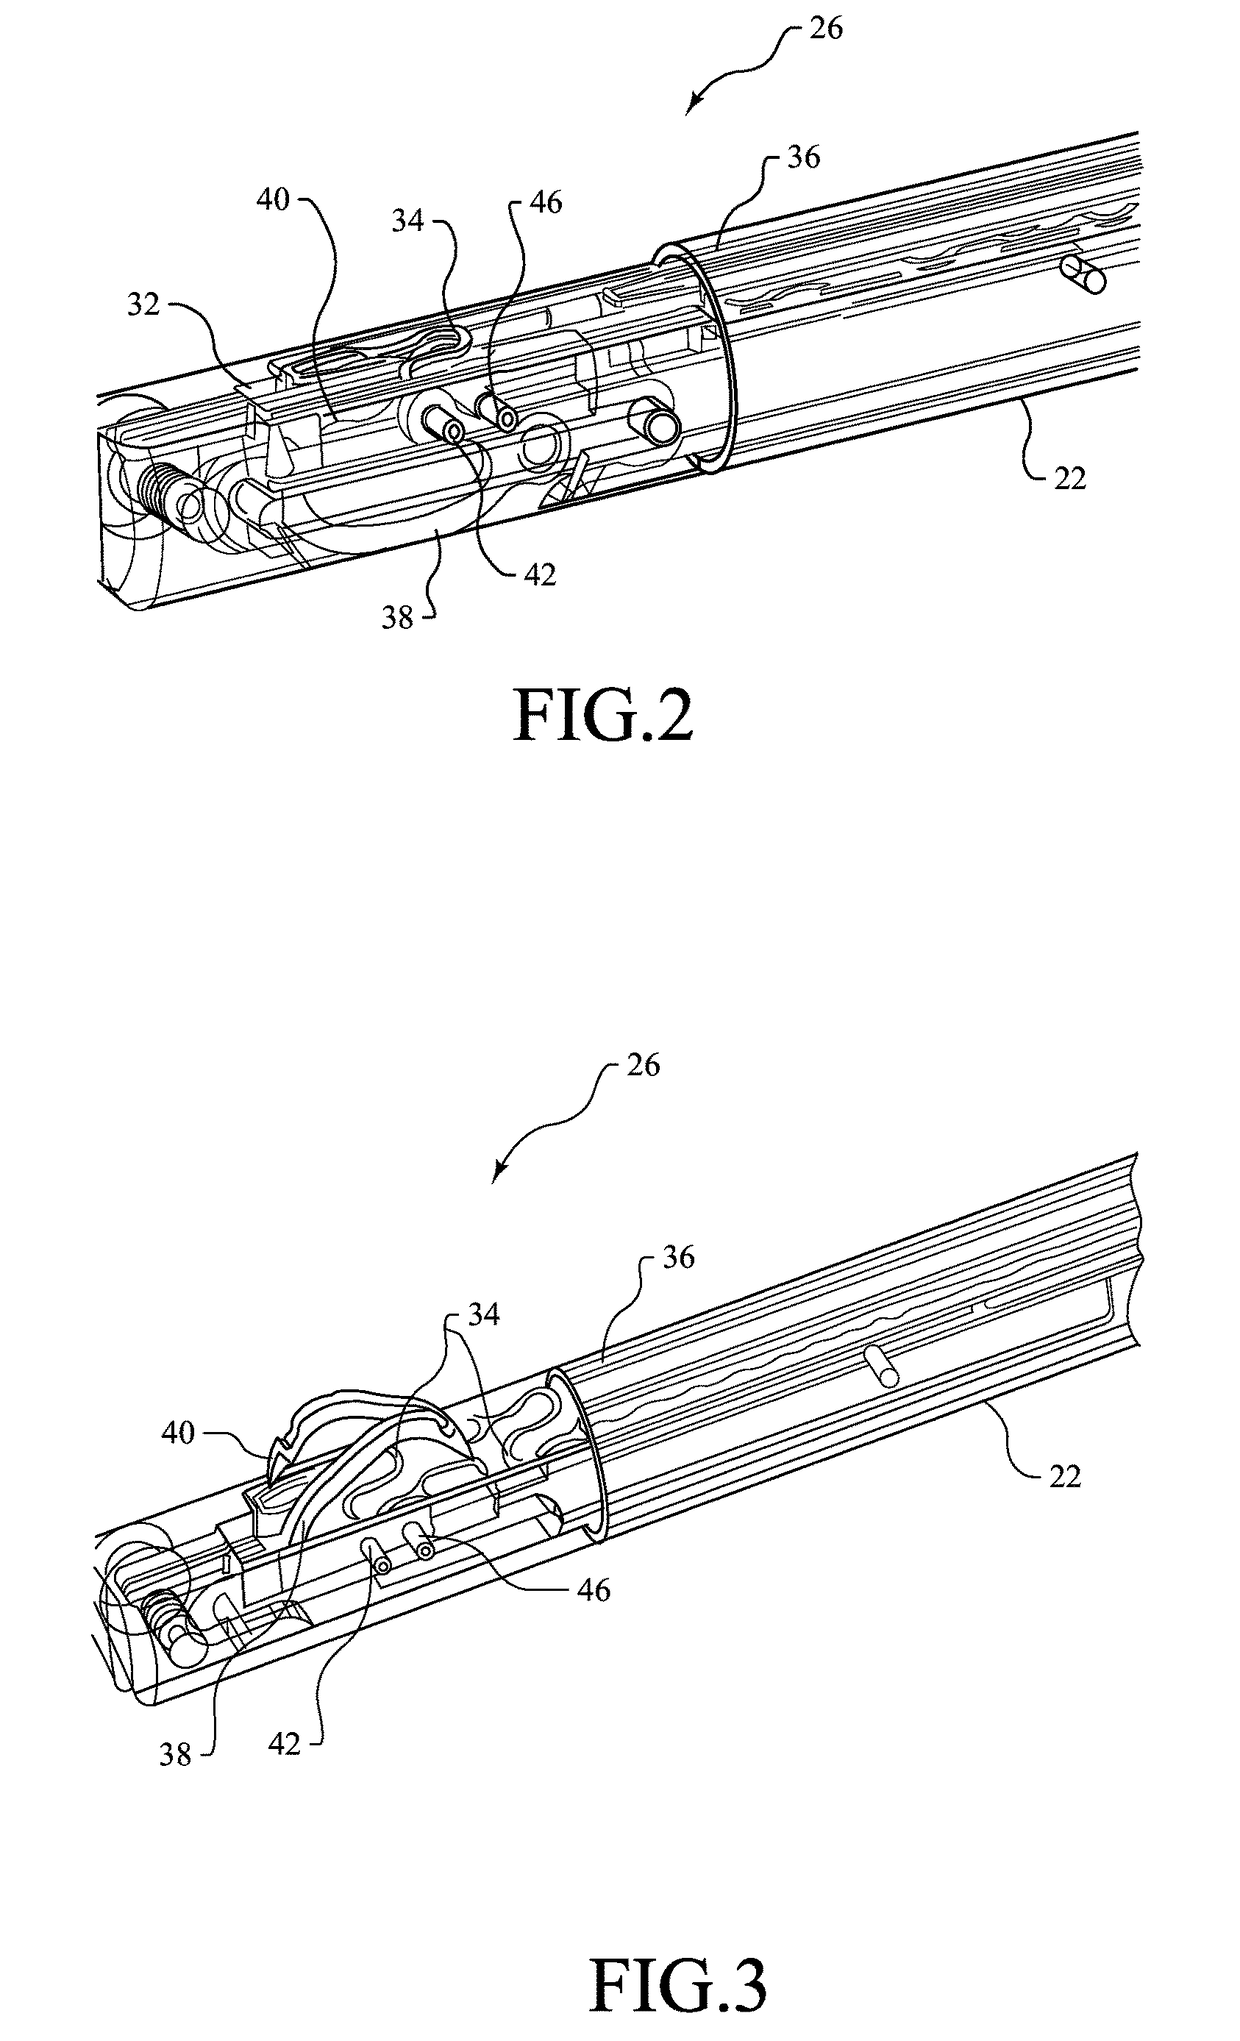 Laparoscopic suture device with autoloading and suture capture